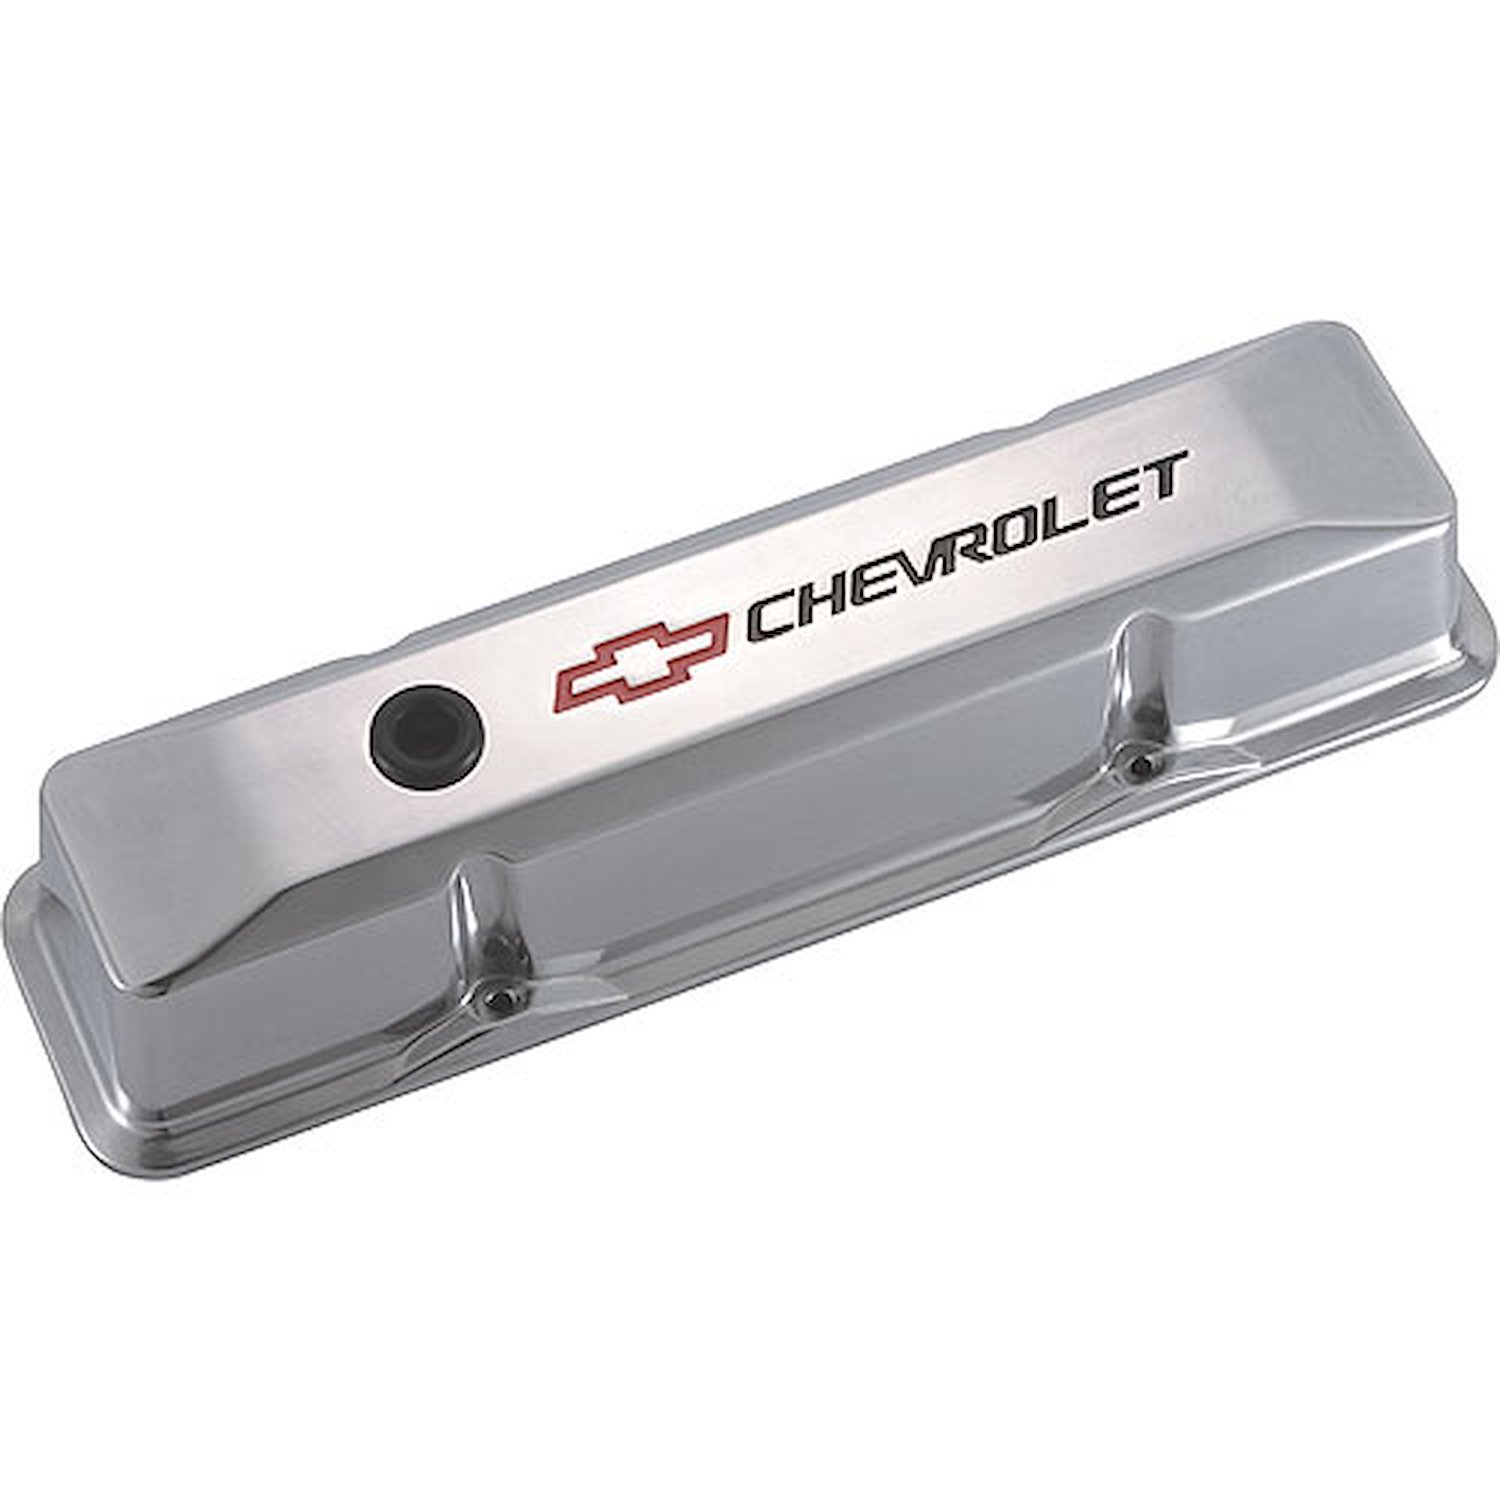 Die-Cast Aluminum Tall Valve Covers for 1958-1986 Small